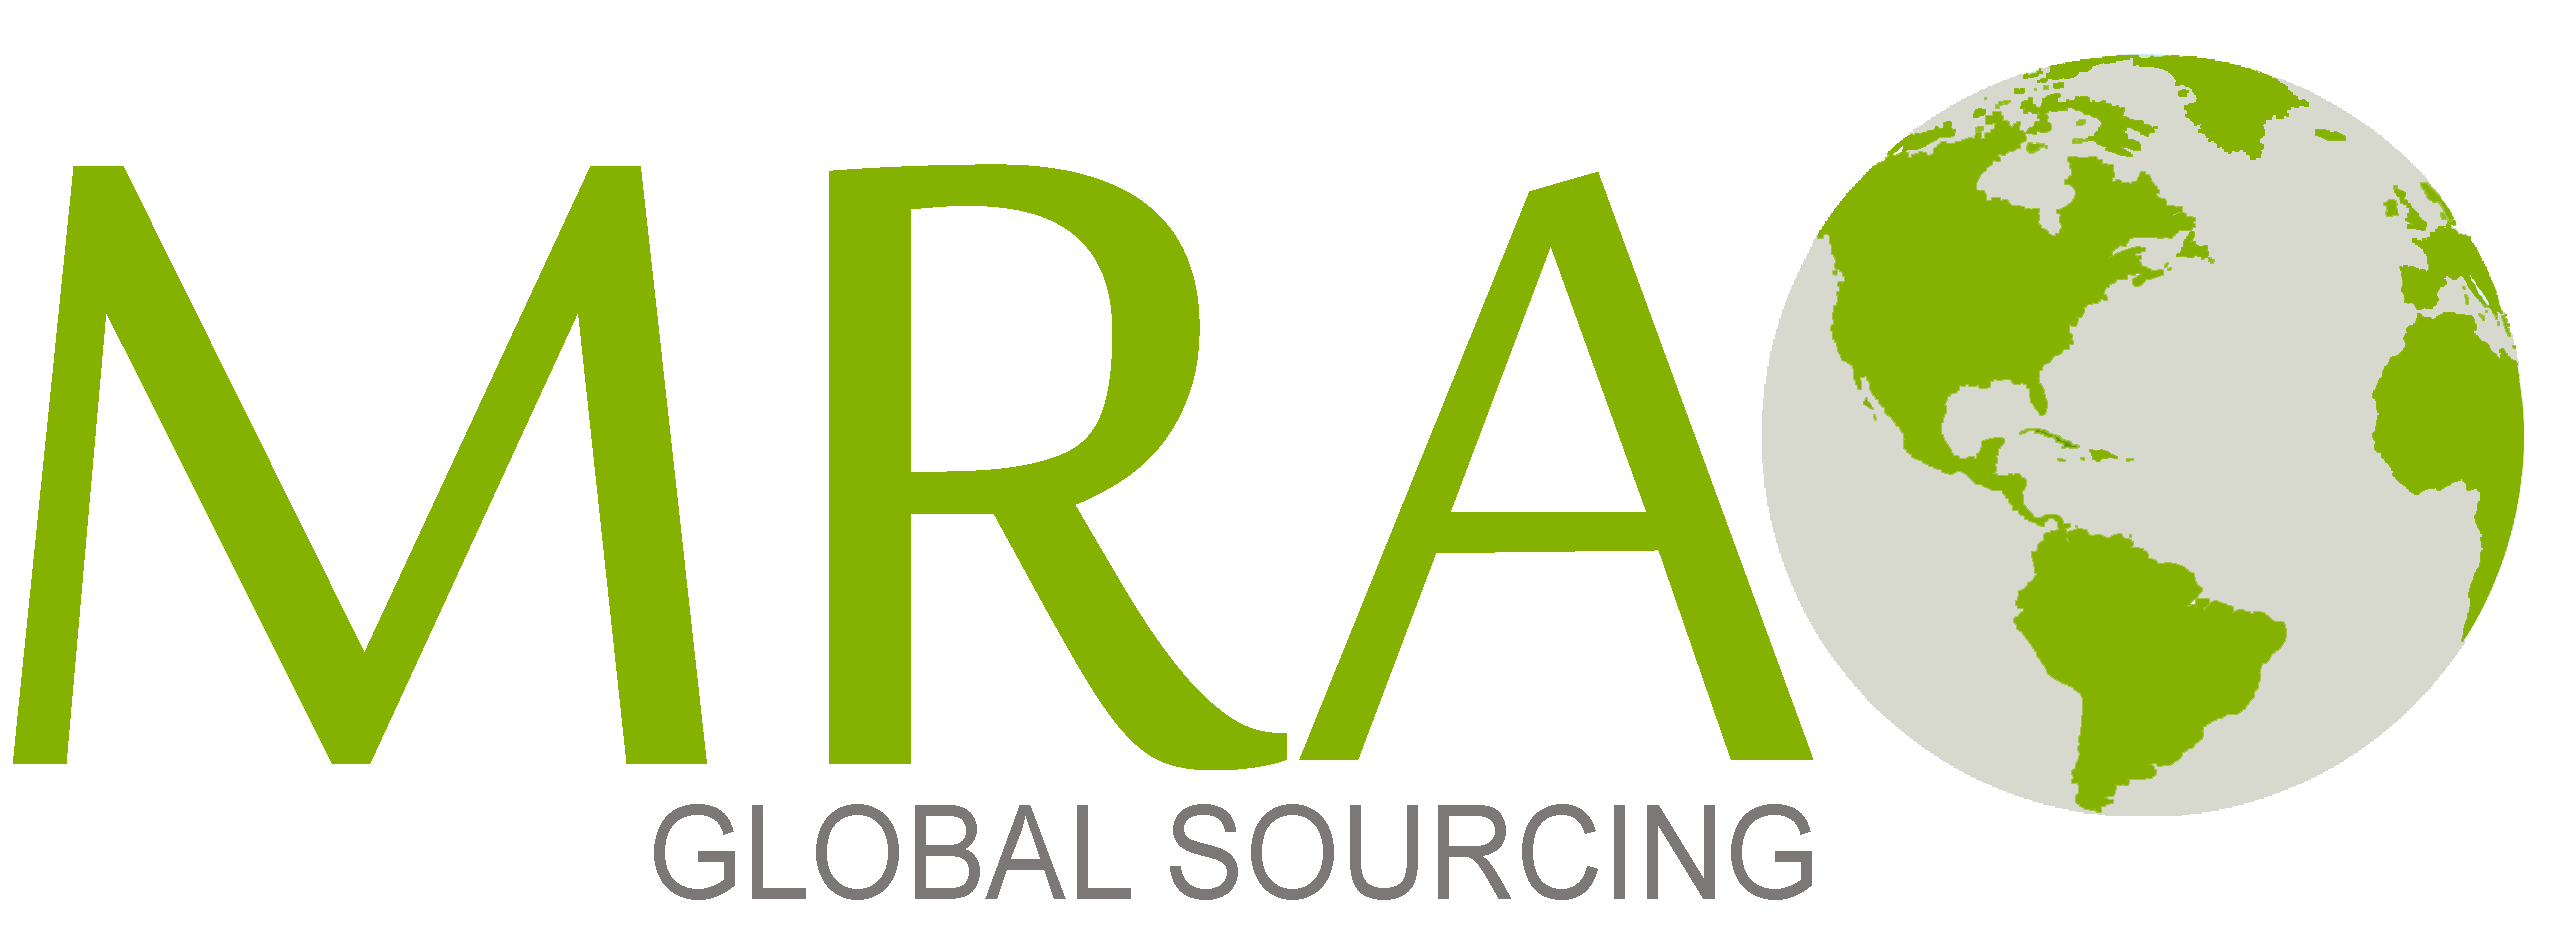 MRA Global Sourcing – Client Logos, Supply/Demand Planning